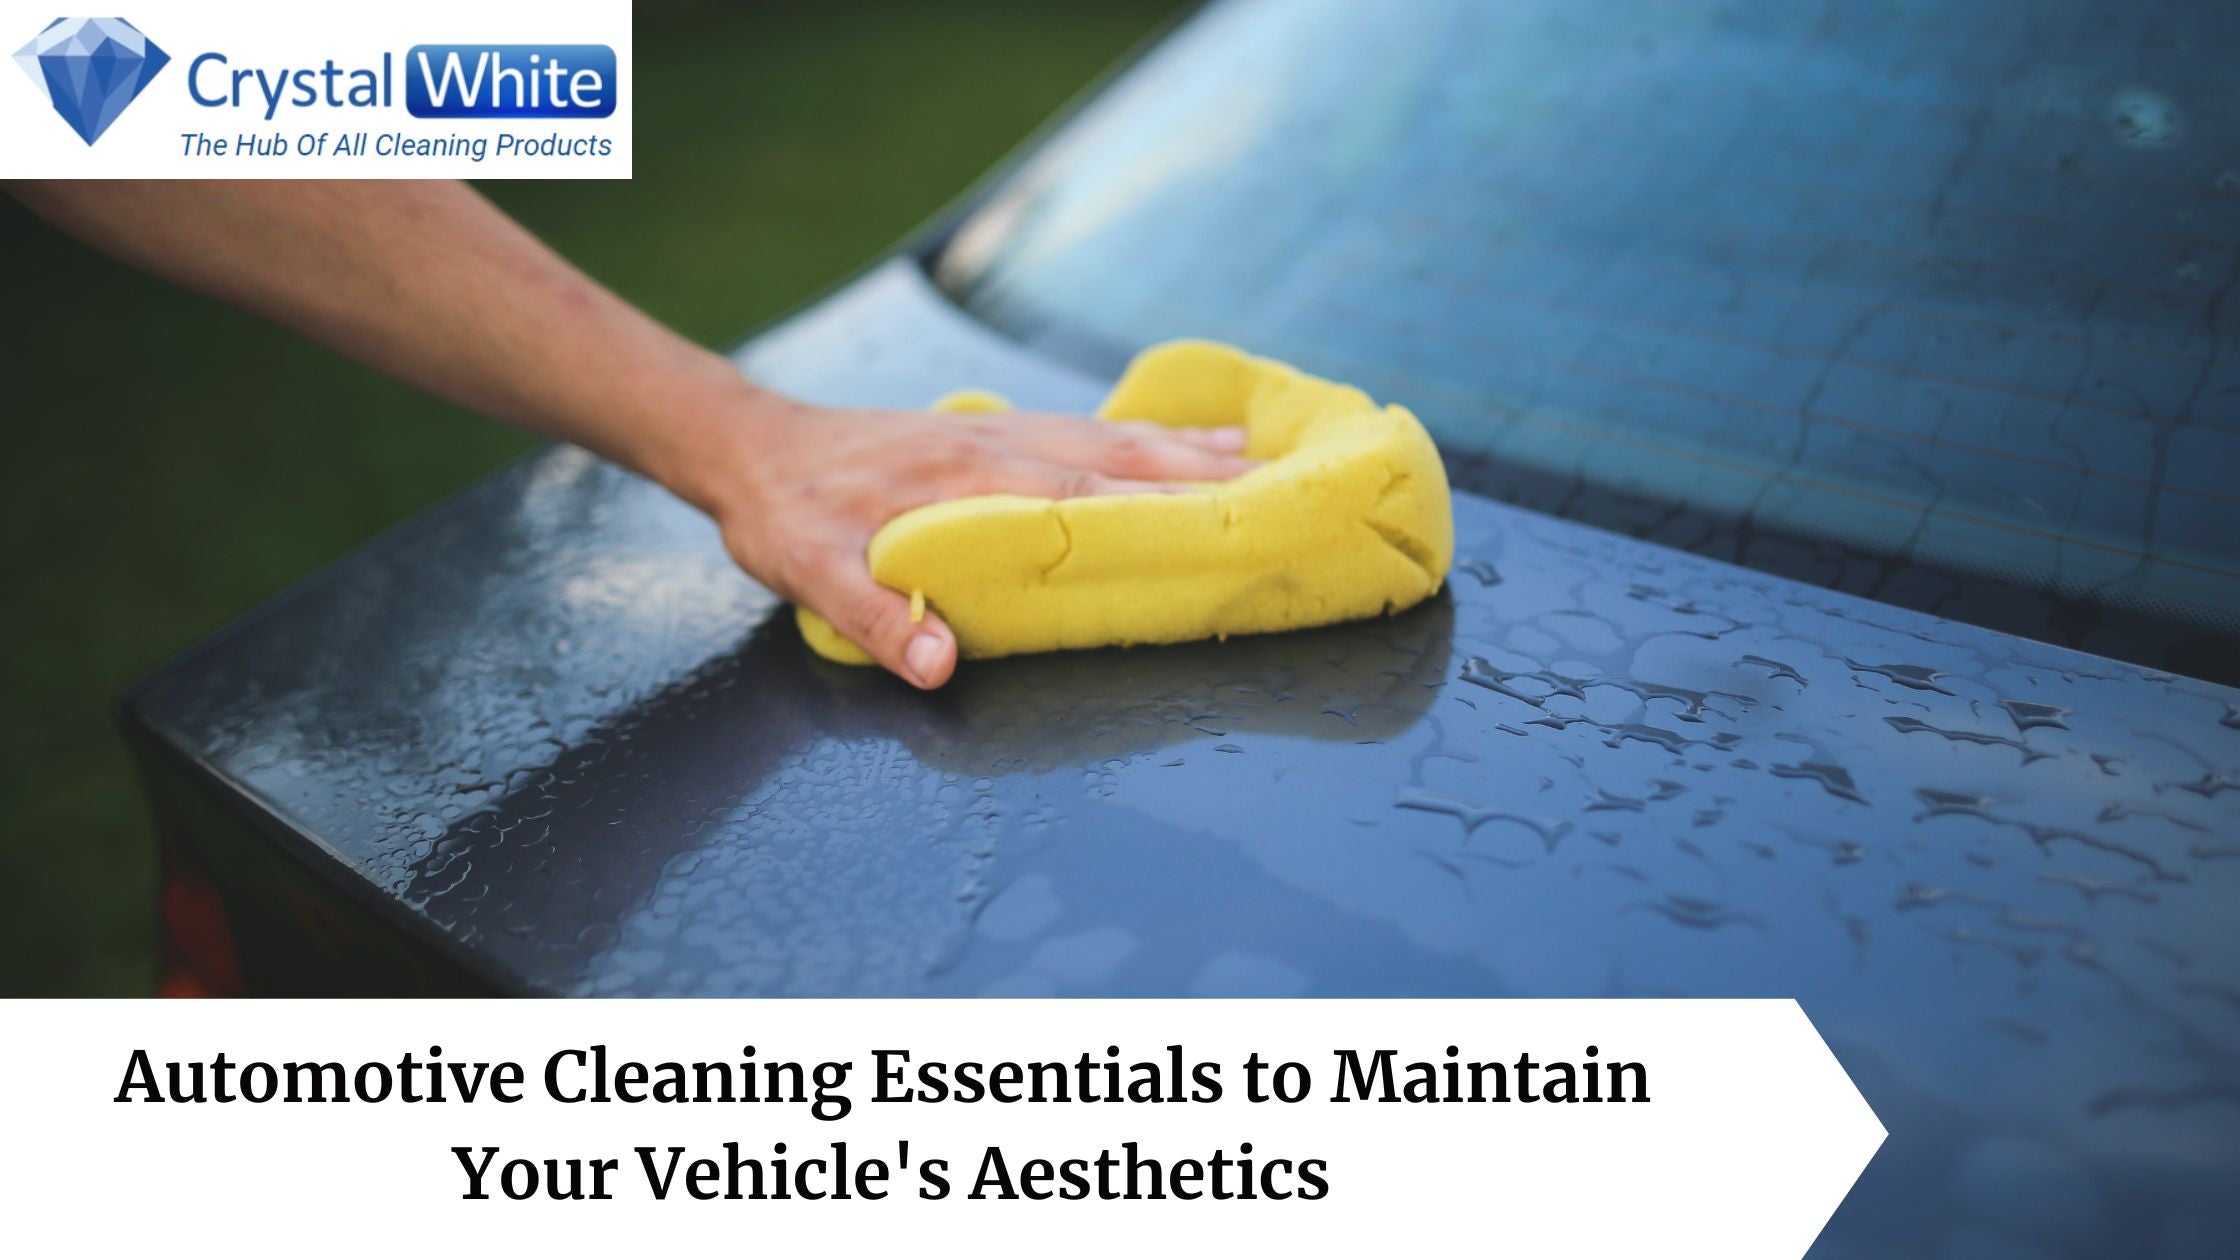 Automotive Cleaning Essentials to Maintain Your Vehicle's Aesthetics